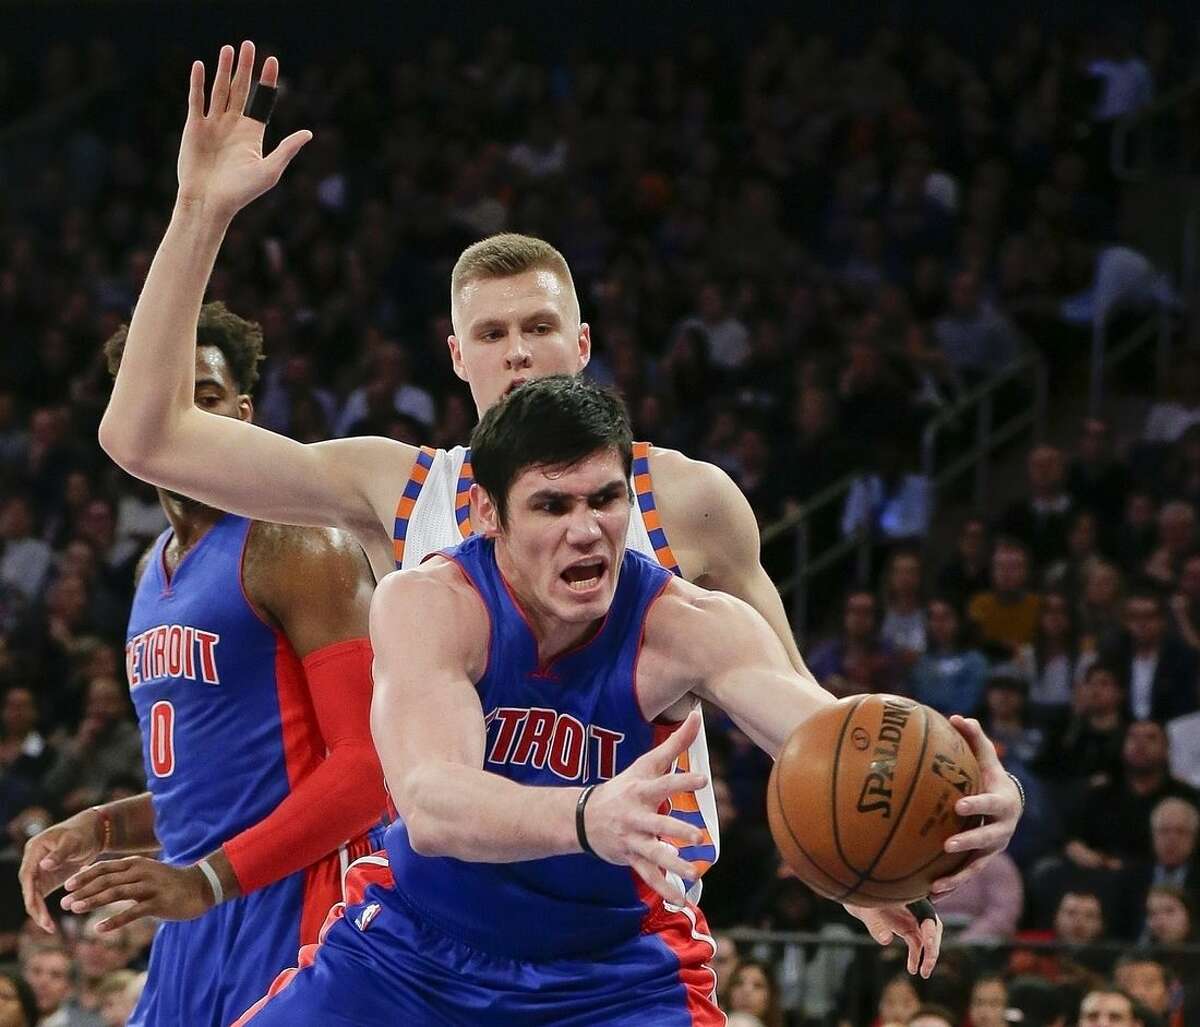 Detroit Pistons' Ersan Ilyasova, right, fights for the ball with New York Knicks' Kristaps Porzingis during the first half of an NBA basketball game Tuesday, Dec. 29, 2015, in New York. (AP Photo/Frank Franklin II)